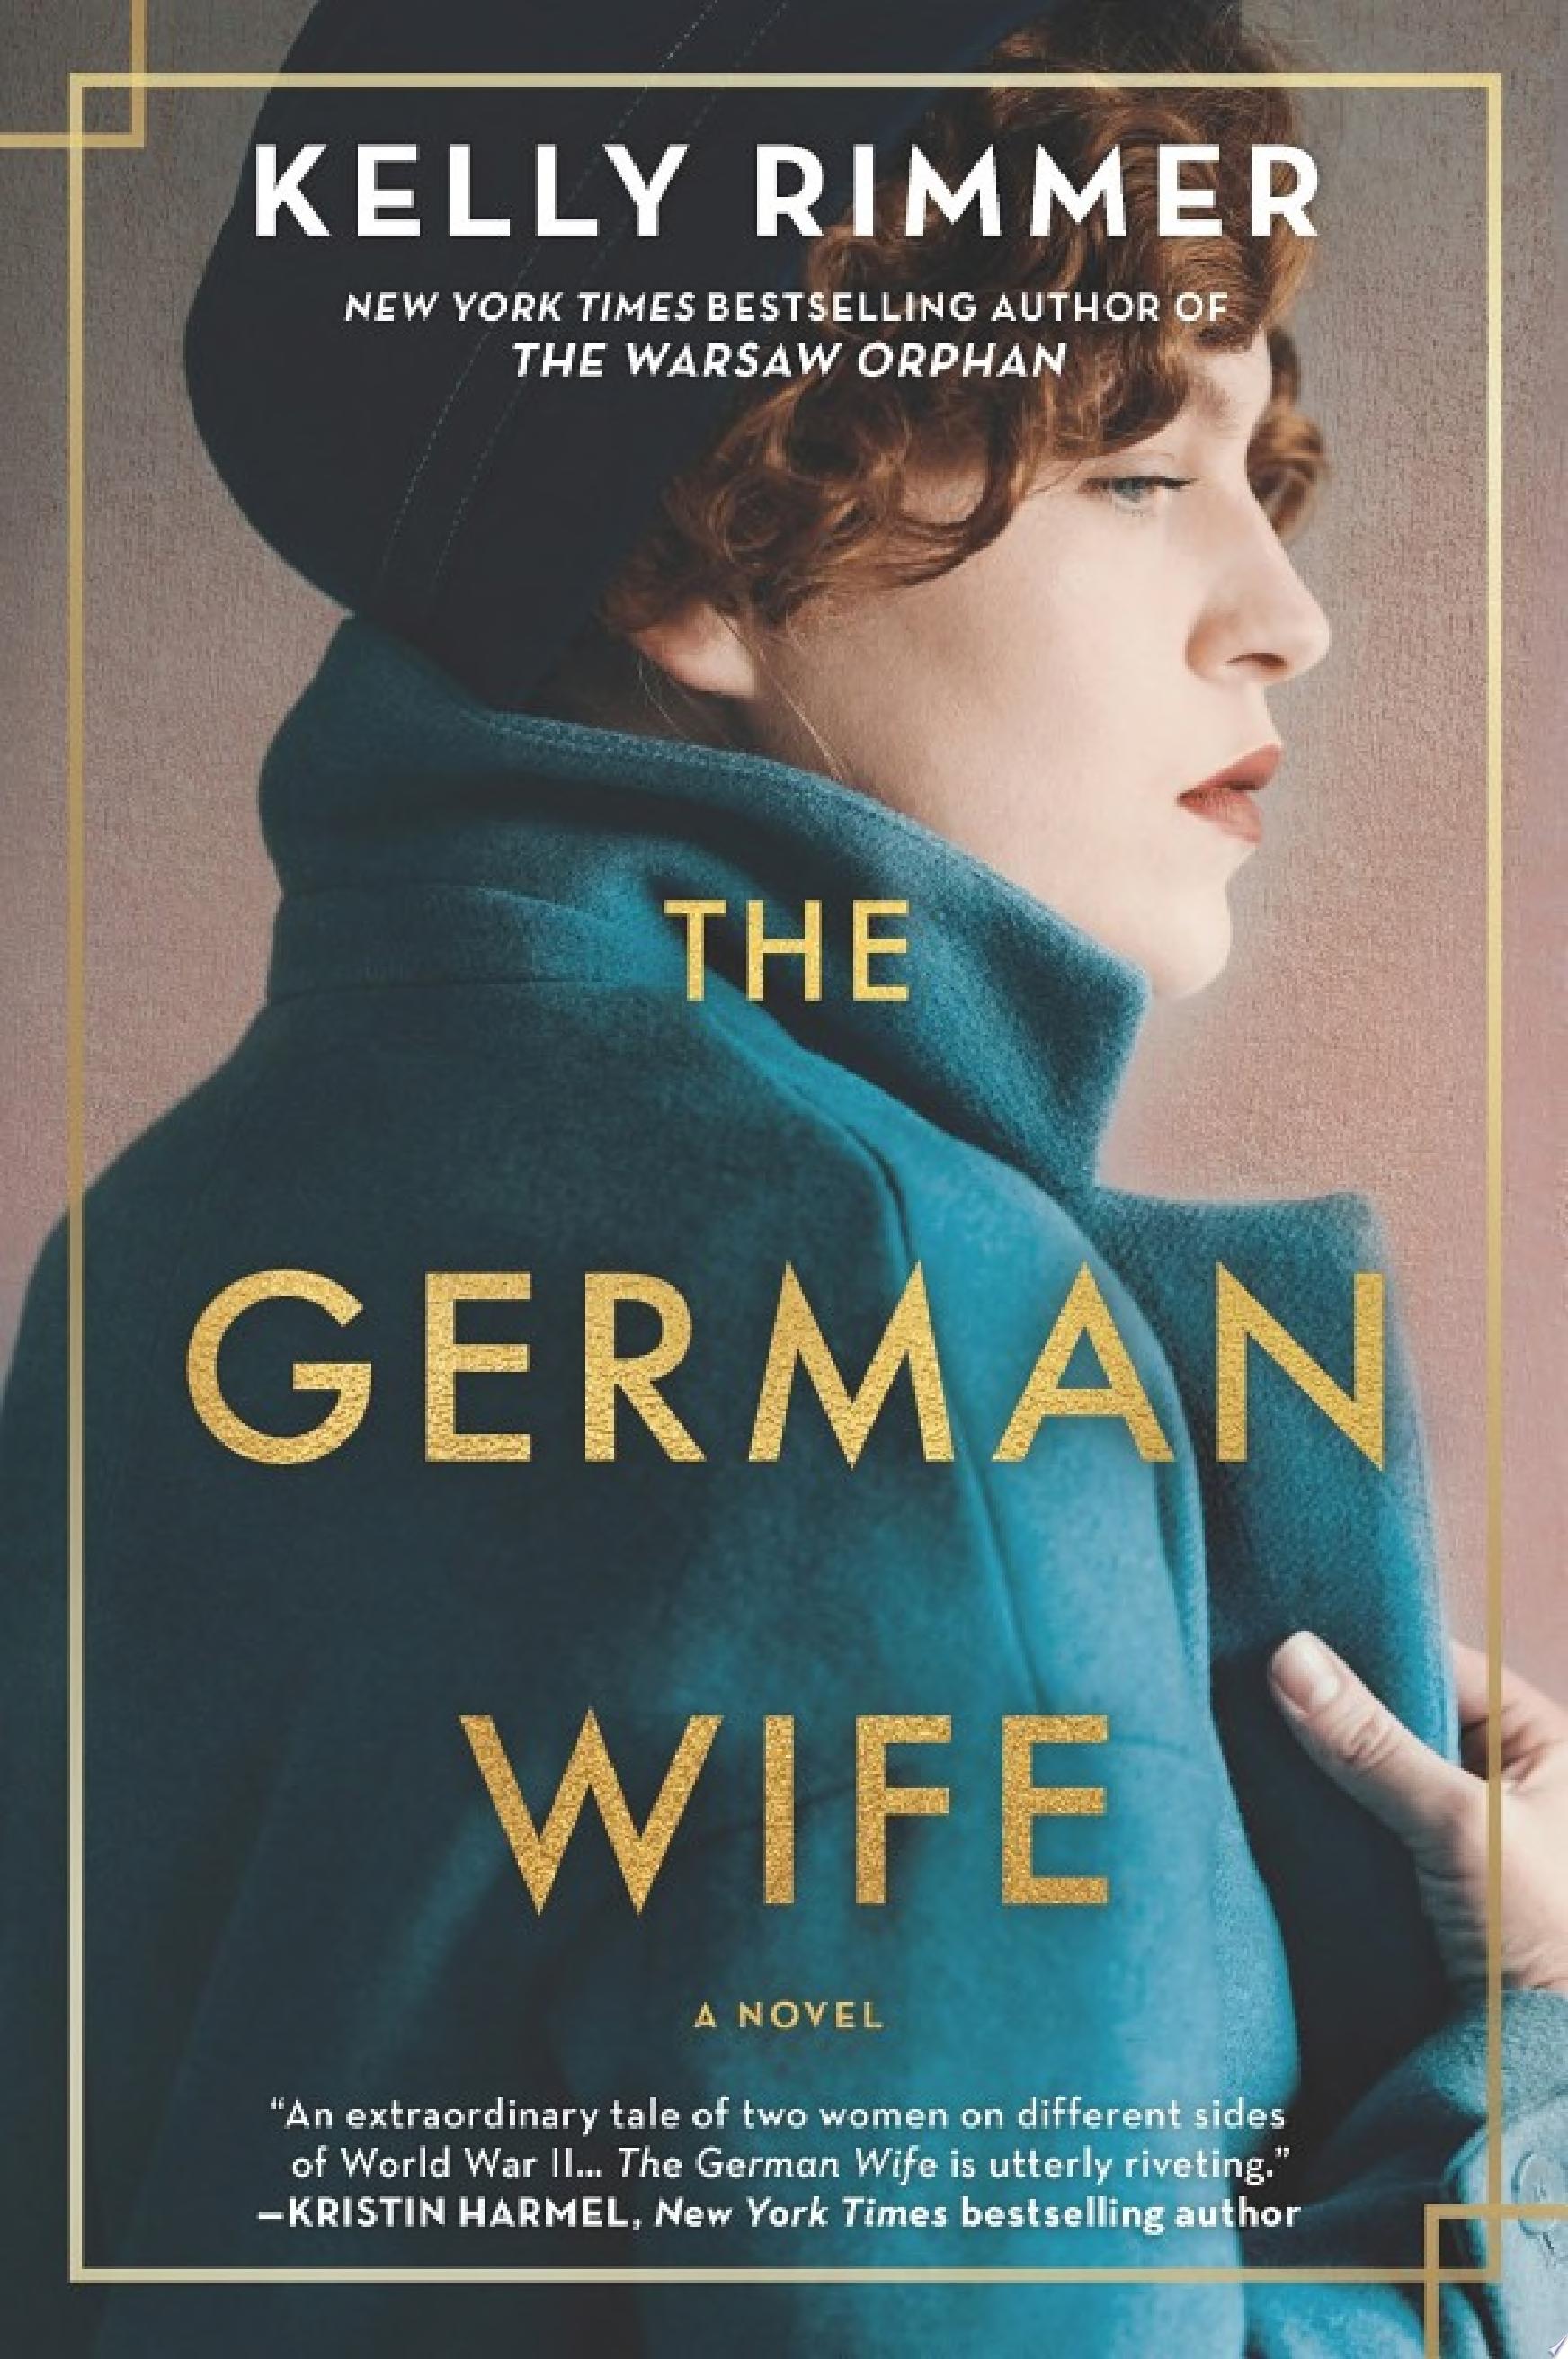 Image for "The German Wife"